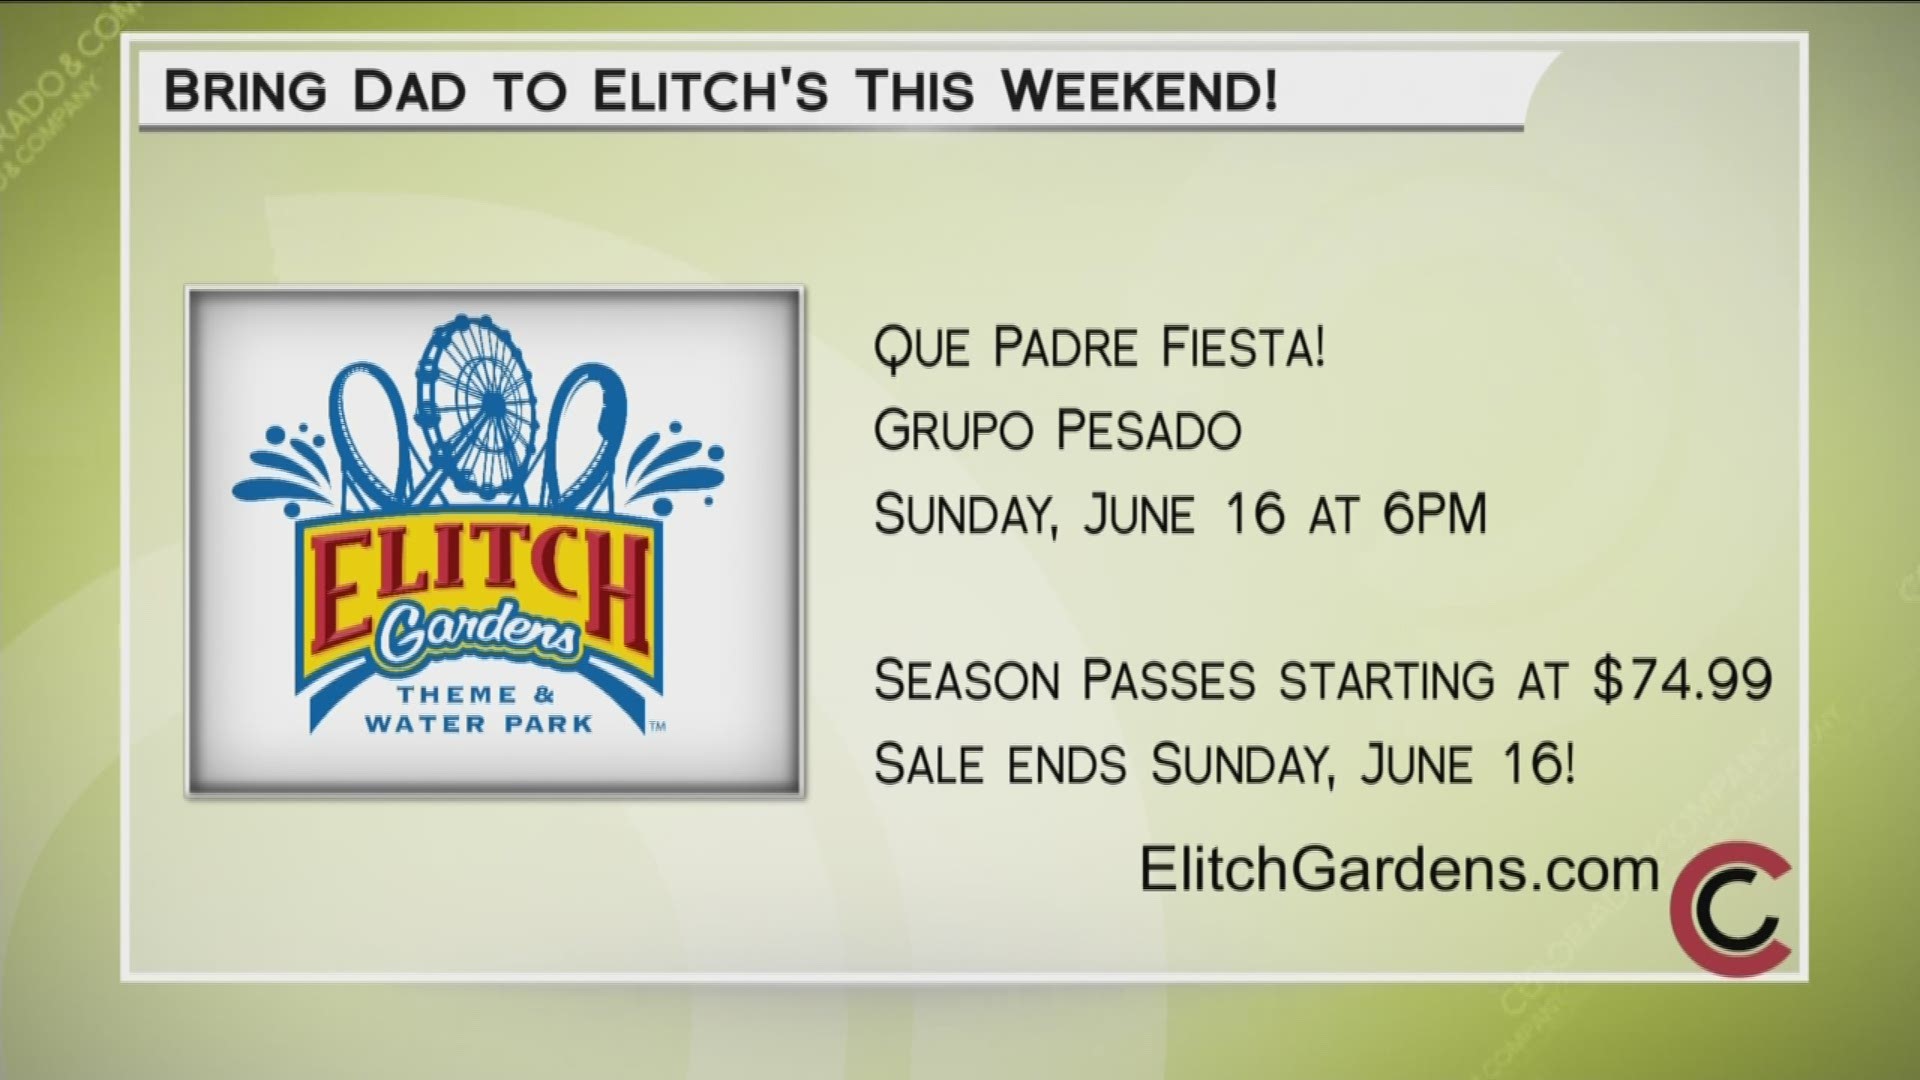 Come on out to Elitch Gardens for their summer concert series. You also have until Sunday to buy your season pass for only $74.99. Learn more at www.ElitchGardens.com. 
THIS INTERVIEW HAS COMMERCIAL CONTENT. PRODUCTS AND SERVICES FEATURED APPEAR AS PAID ADVERTISING.